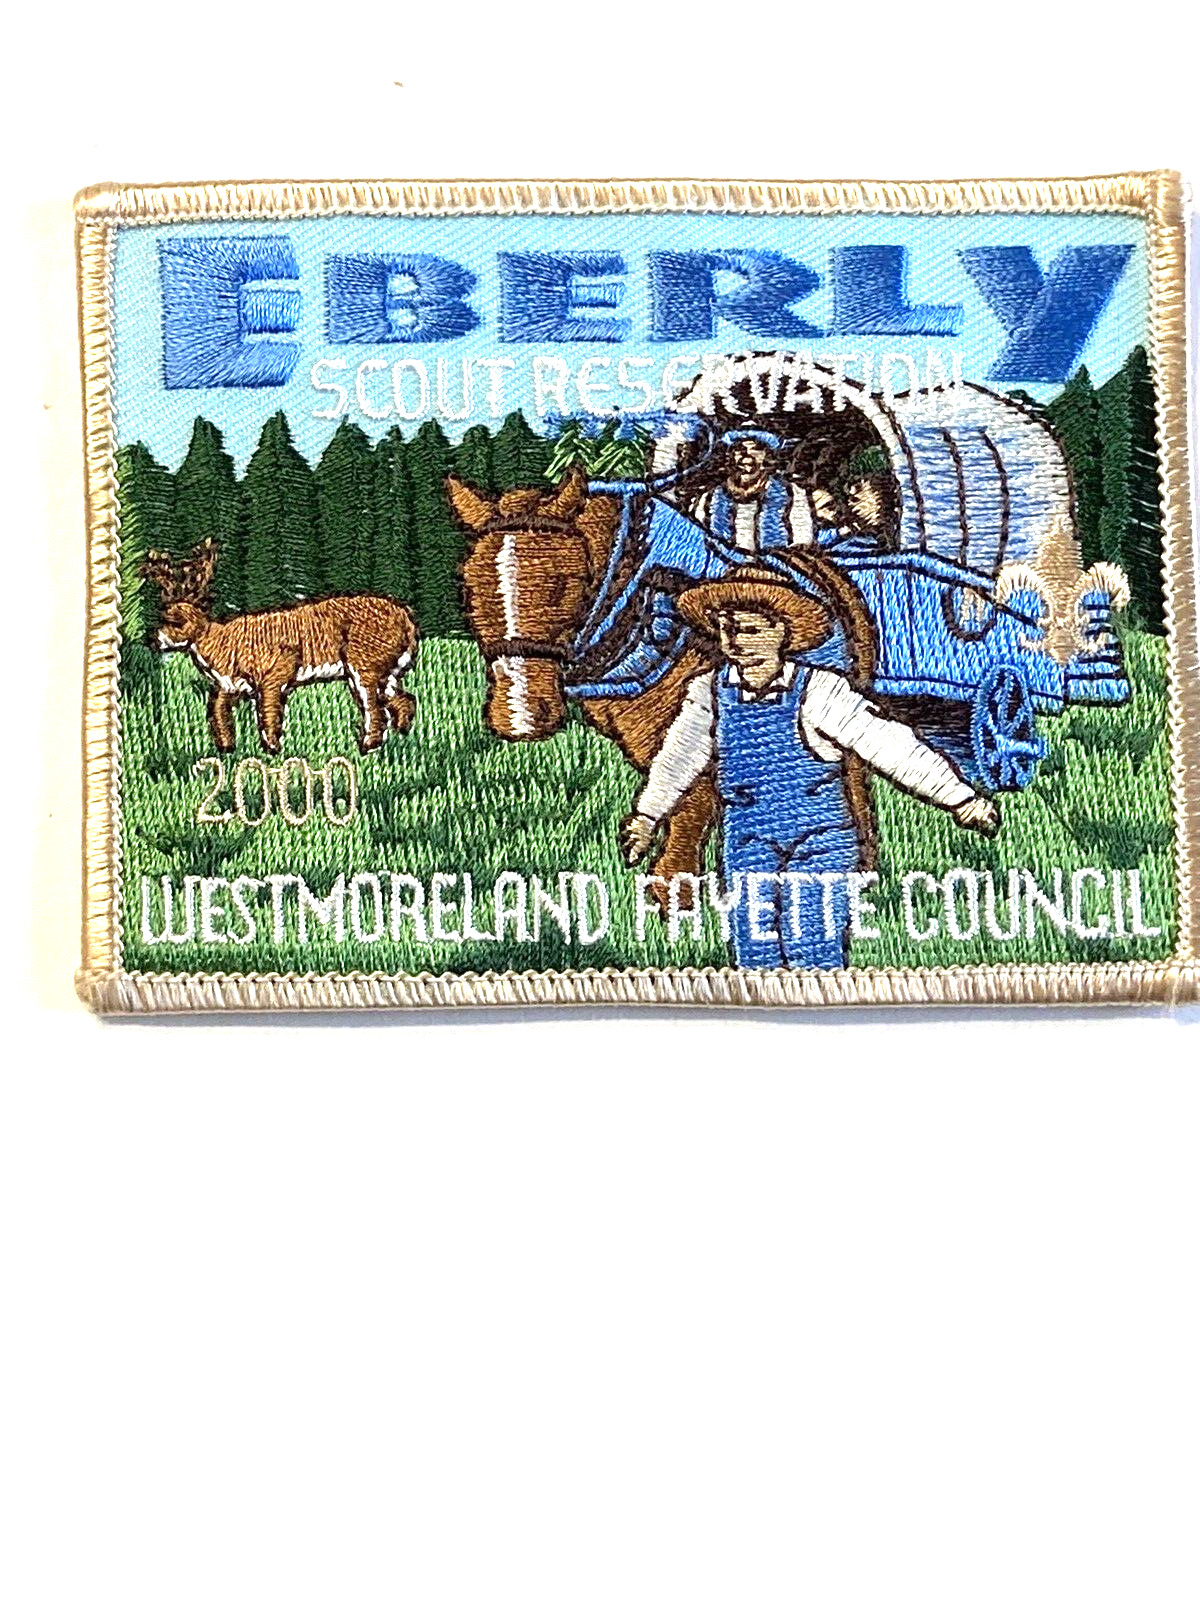 Eberly Scout Reservation 2000 Westmoreland Fayette Council Boy Scout Patch